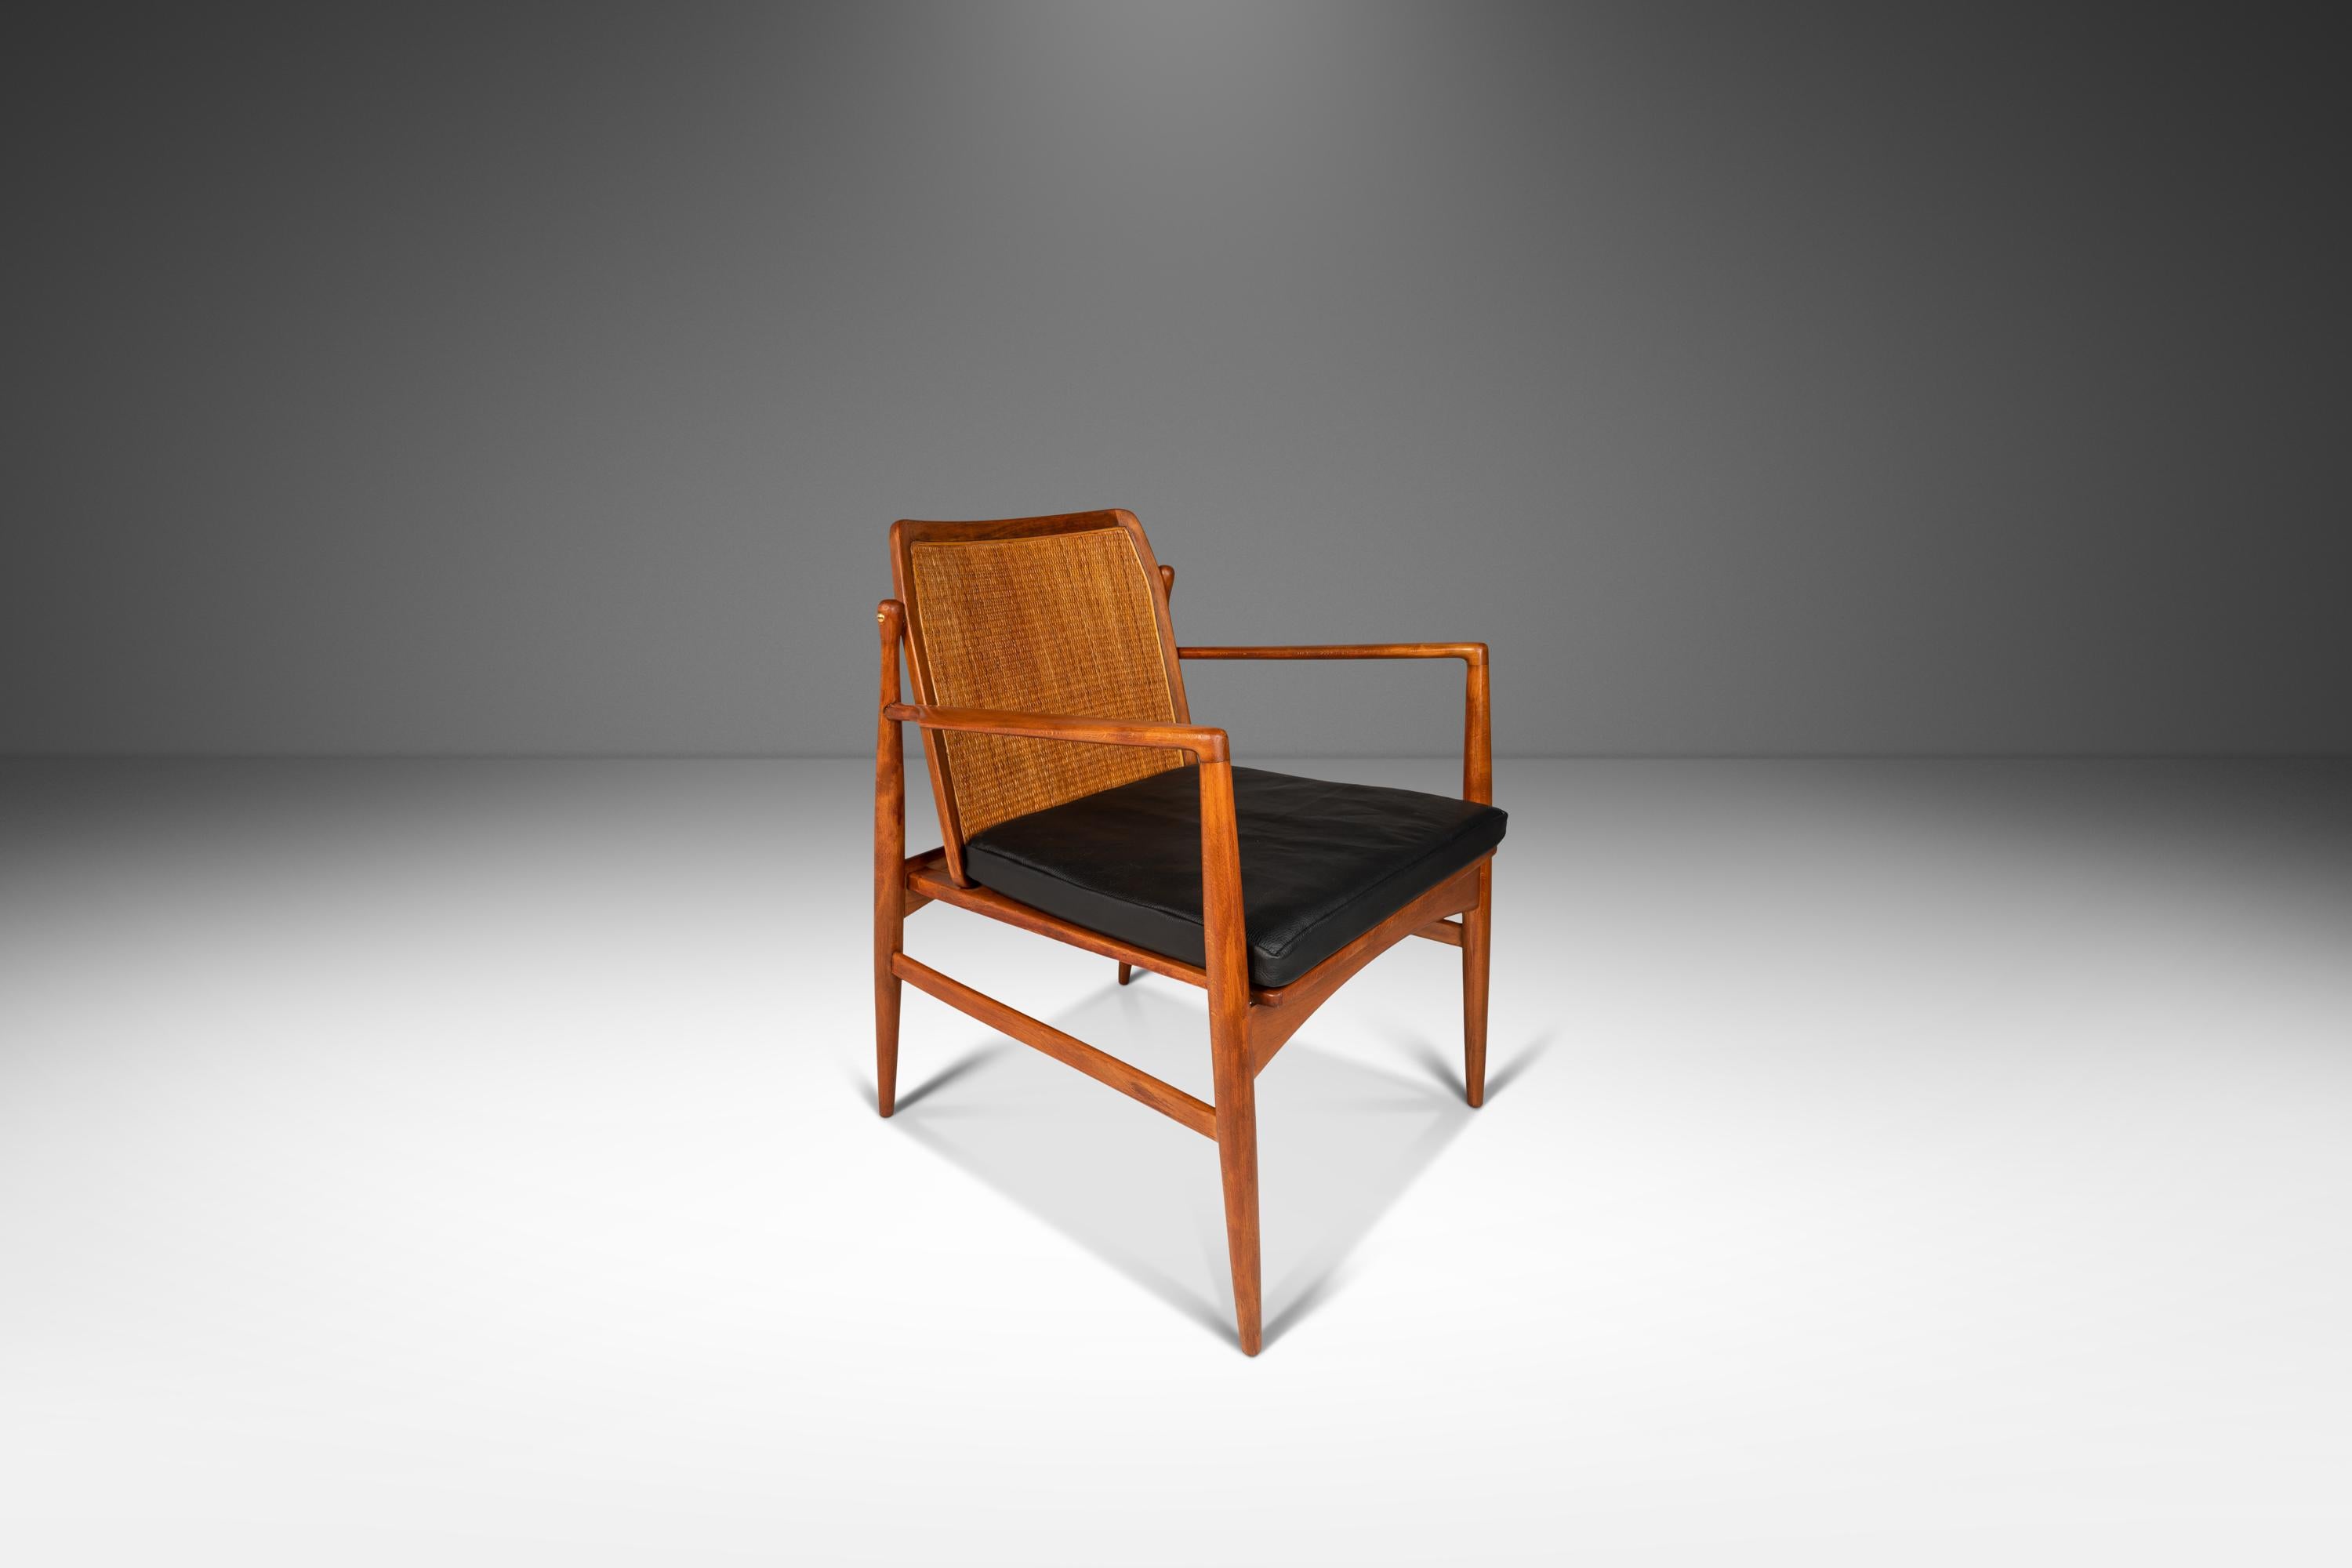 Introducing a true Danish Modern masterpiece: a rare cane back lounge chair designed by the incomparable Ib Kofod Larsen for Selig. This iconic armchair has been fully restored and newly upholstered, making it the perfect addition to any modern